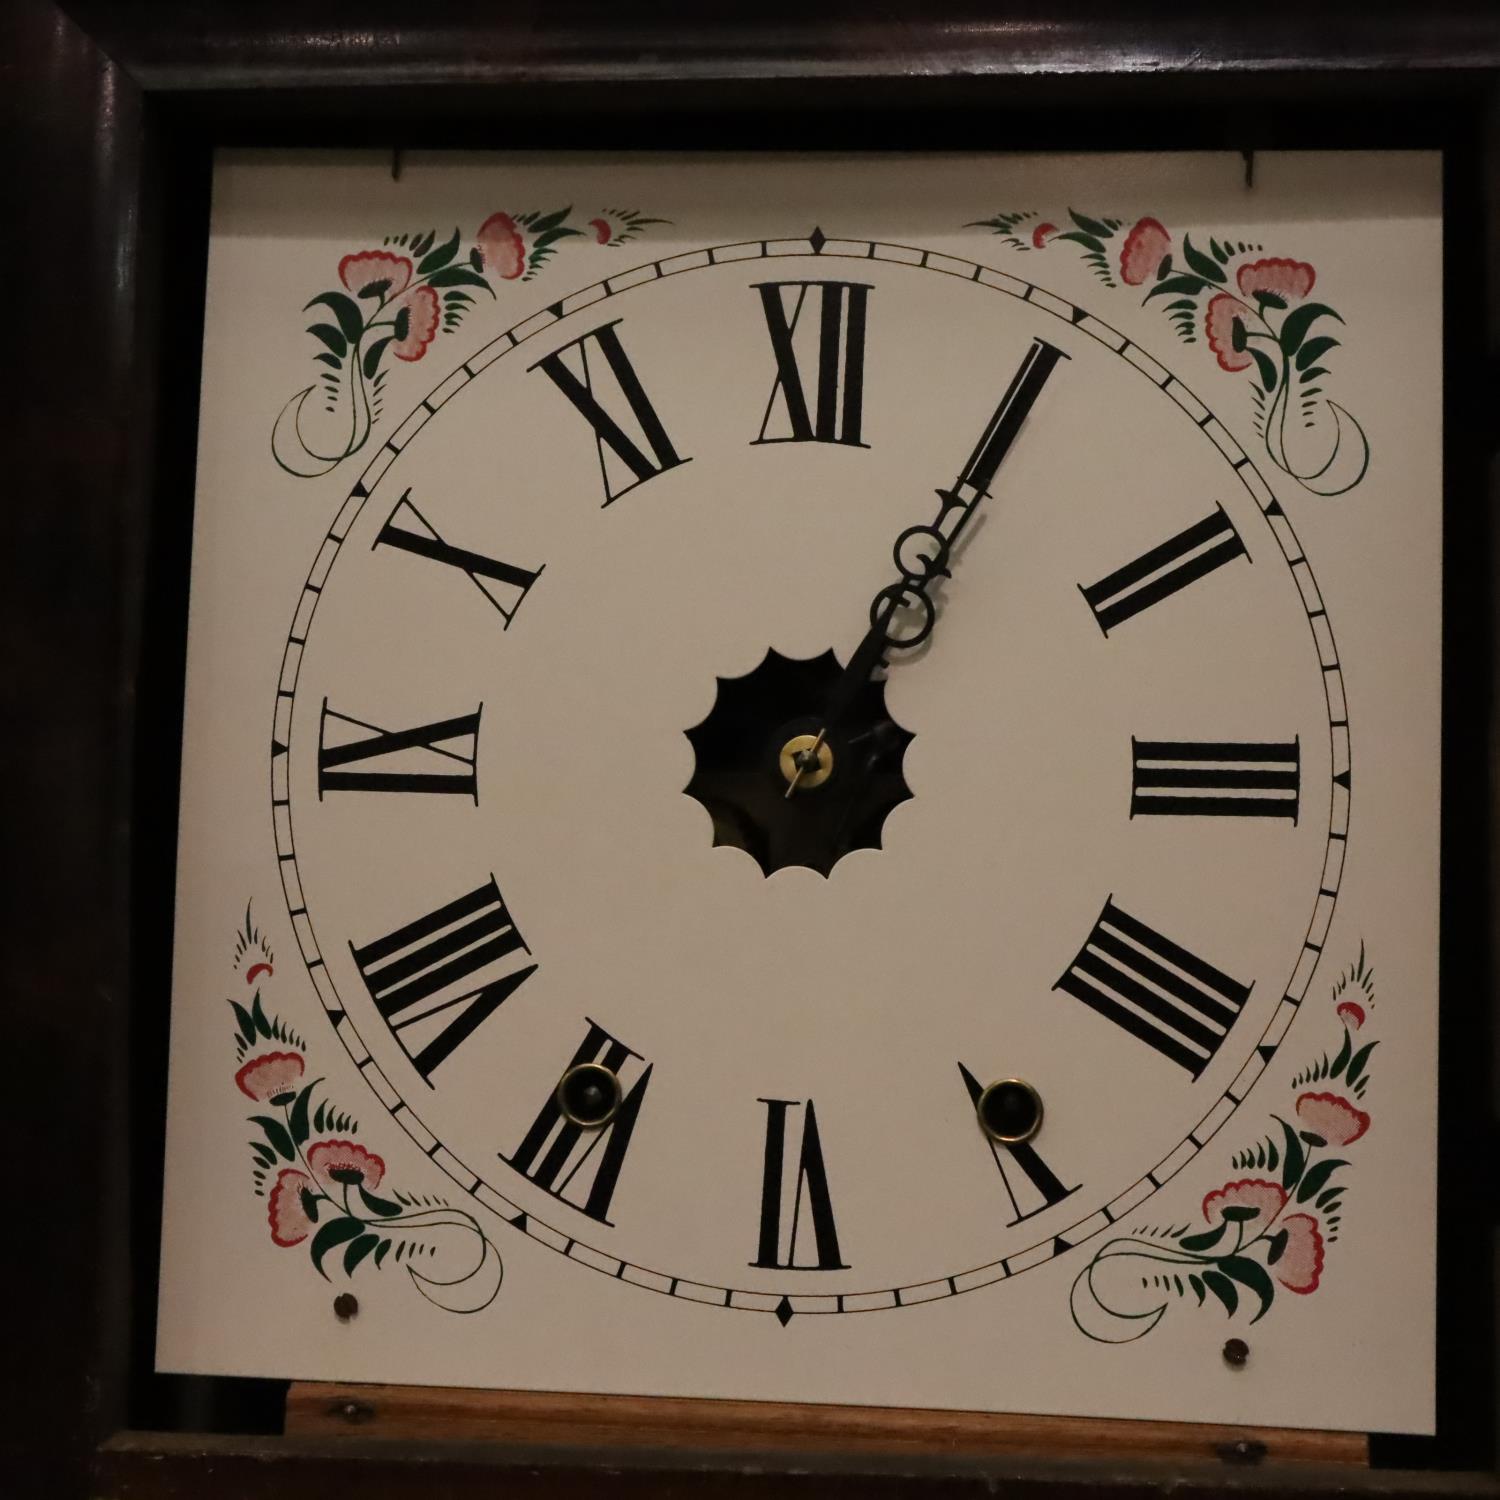 Seven day American Jerome & Co chiming wall clock in working order with key and pendulum, 76 x 43 - Image 2 of 4